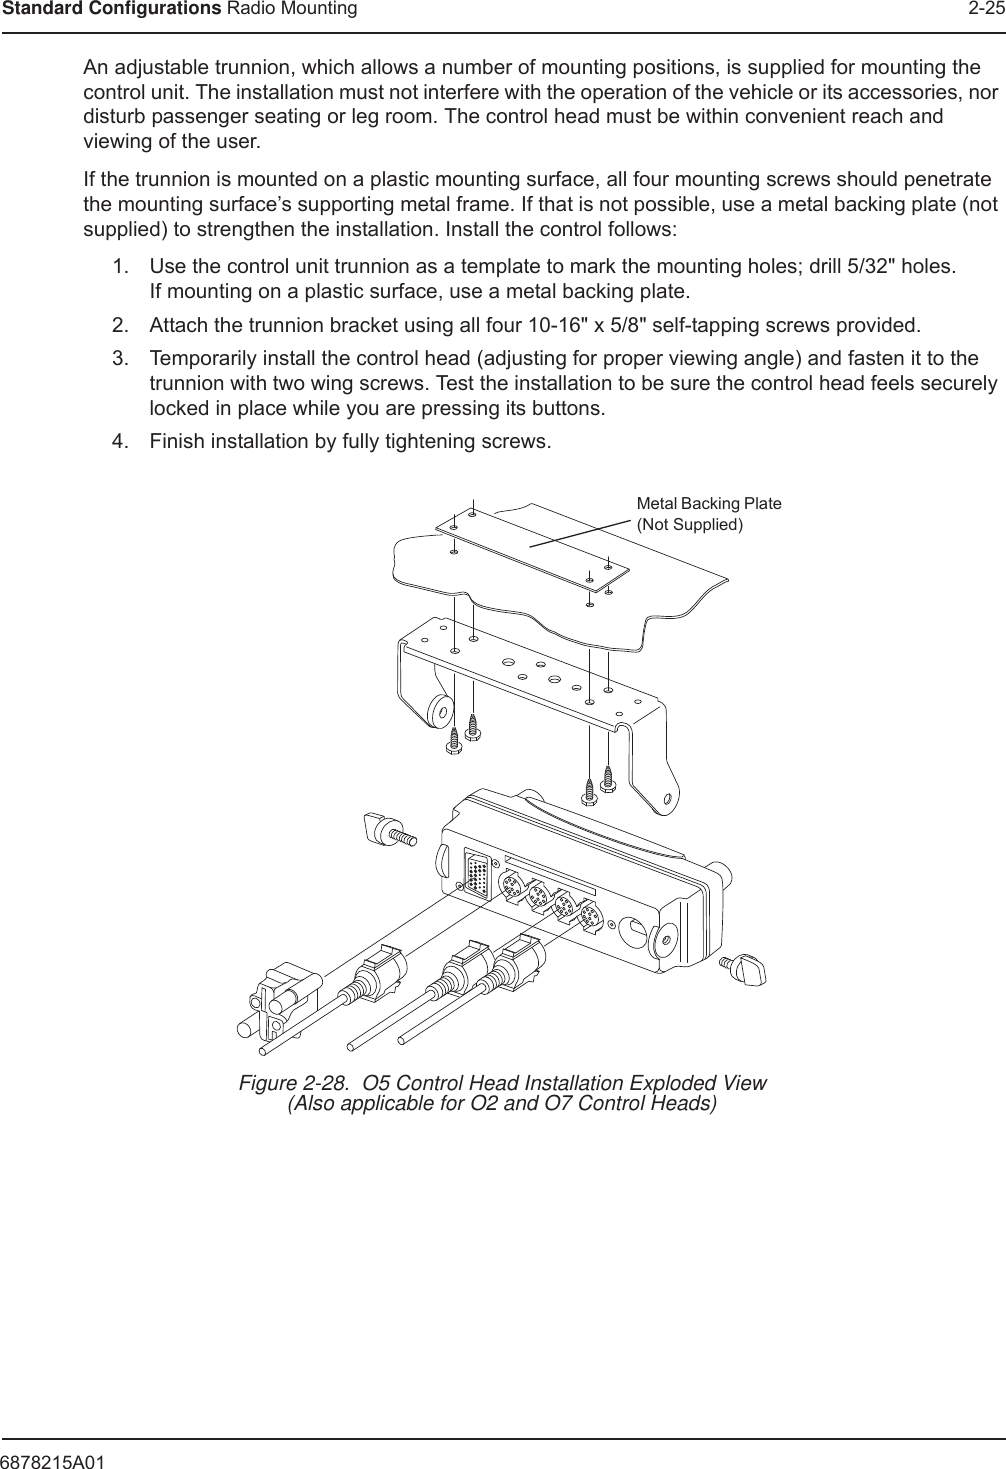 6878215A01Standard Configurations Radio Mounting 2-25An adjustable trunnion, which allows a number of mounting positions, is supplied for mounting the control unit. The installation must not interfere with the operation of the vehicle or its accessories, nor disturb passenger seating or leg room. The control head must be within convenient reach and viewing of the user.If the trunnion is mounted on a plastic mounting surface, all four mounting screws should penetrate the mounting surface’s supporting metal frame. If that is not possible, use a metal backing plate (not supplied) to strengthen the installation. Install the control follows:1. Use the control unit trunnion as a template to mark the mounting holes; drill 5/32&quot; holes. If mounting on a plastic surface, use a metal backing plate.2. Attach the trunnion bracket using all four 10-16&quot; x 5/8&quot; self-tapping screws provided.3. Temporarily install the control head (adjusting for proper viewing angle) and fasten it to the trunnion with two wing screws. Test the installation to be sure the control head feels securely locked in place while you are pressing its buttons.4. Finish installation by fully tightening screws.Figure 2-28.  O5 Control Head Installation Exploded View (Also applicable for O2 and O7 Control Heads)Metal Backing Plate (Not Supplied)